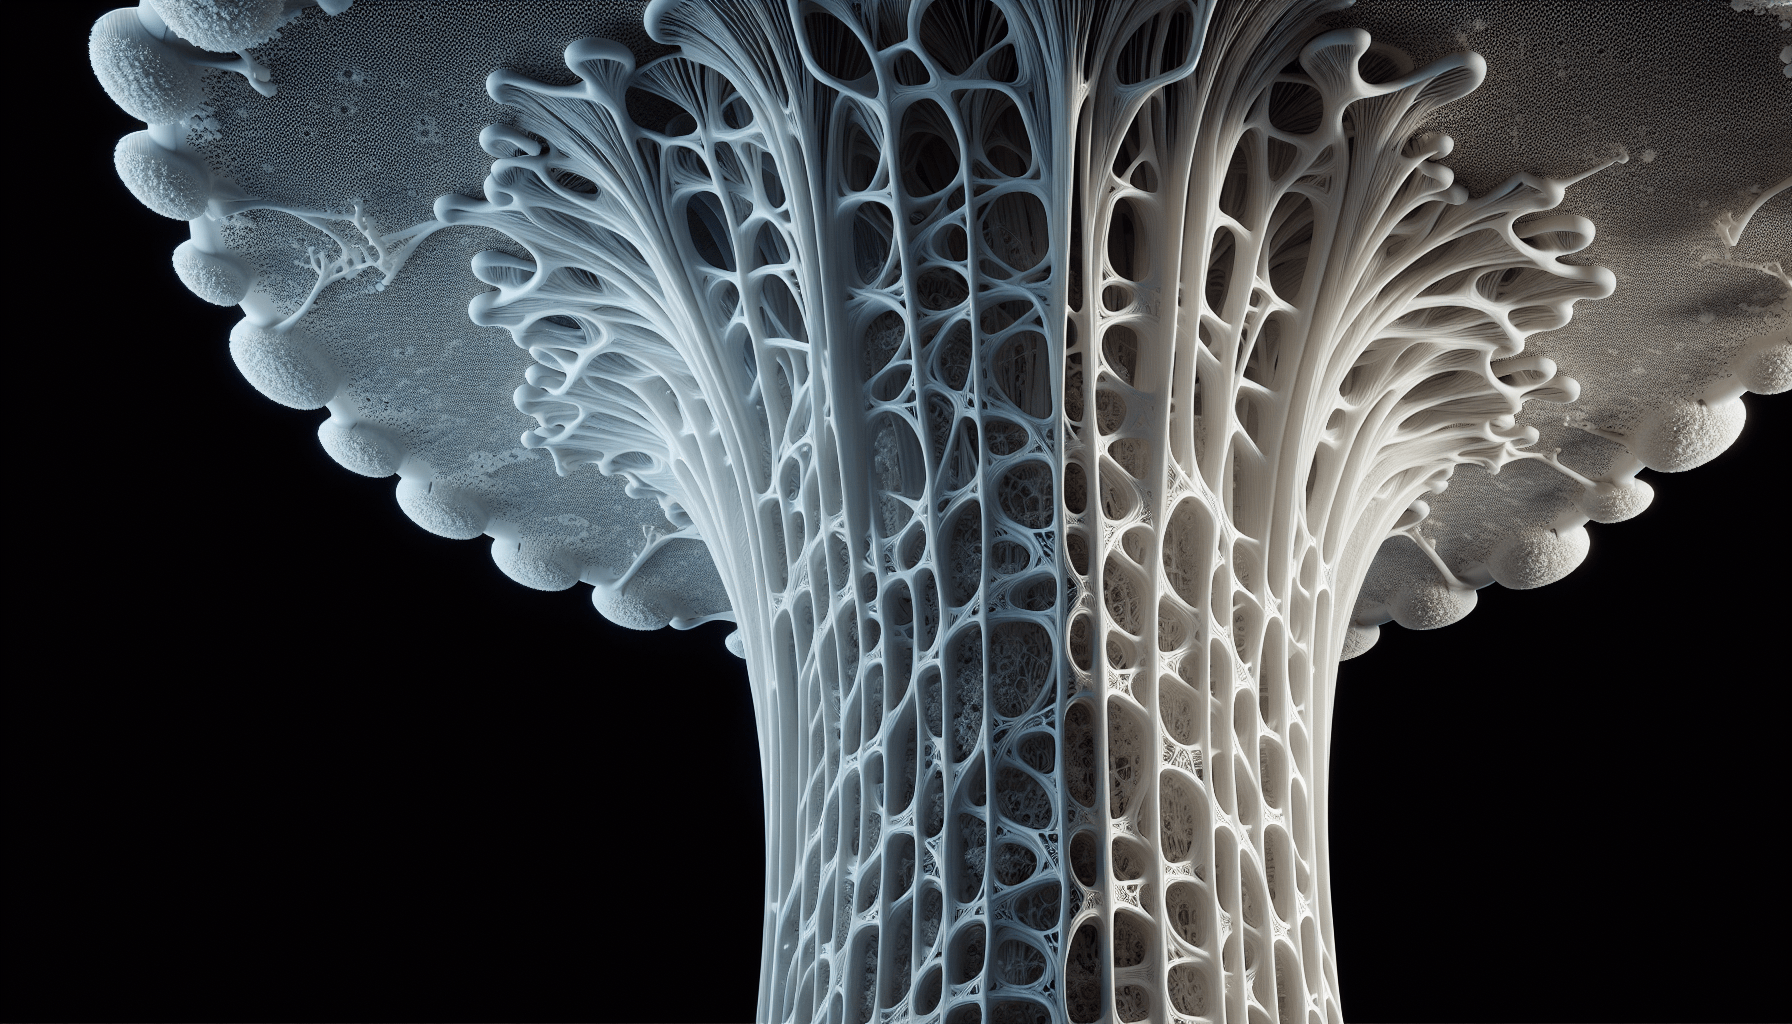 3d-printed-mycelium-tree-column-by-blast-studio-architecture-that-could-feed-people 3D-Printed Mycelium Tree Column by Blast Studio: Architecture That Could Feed People